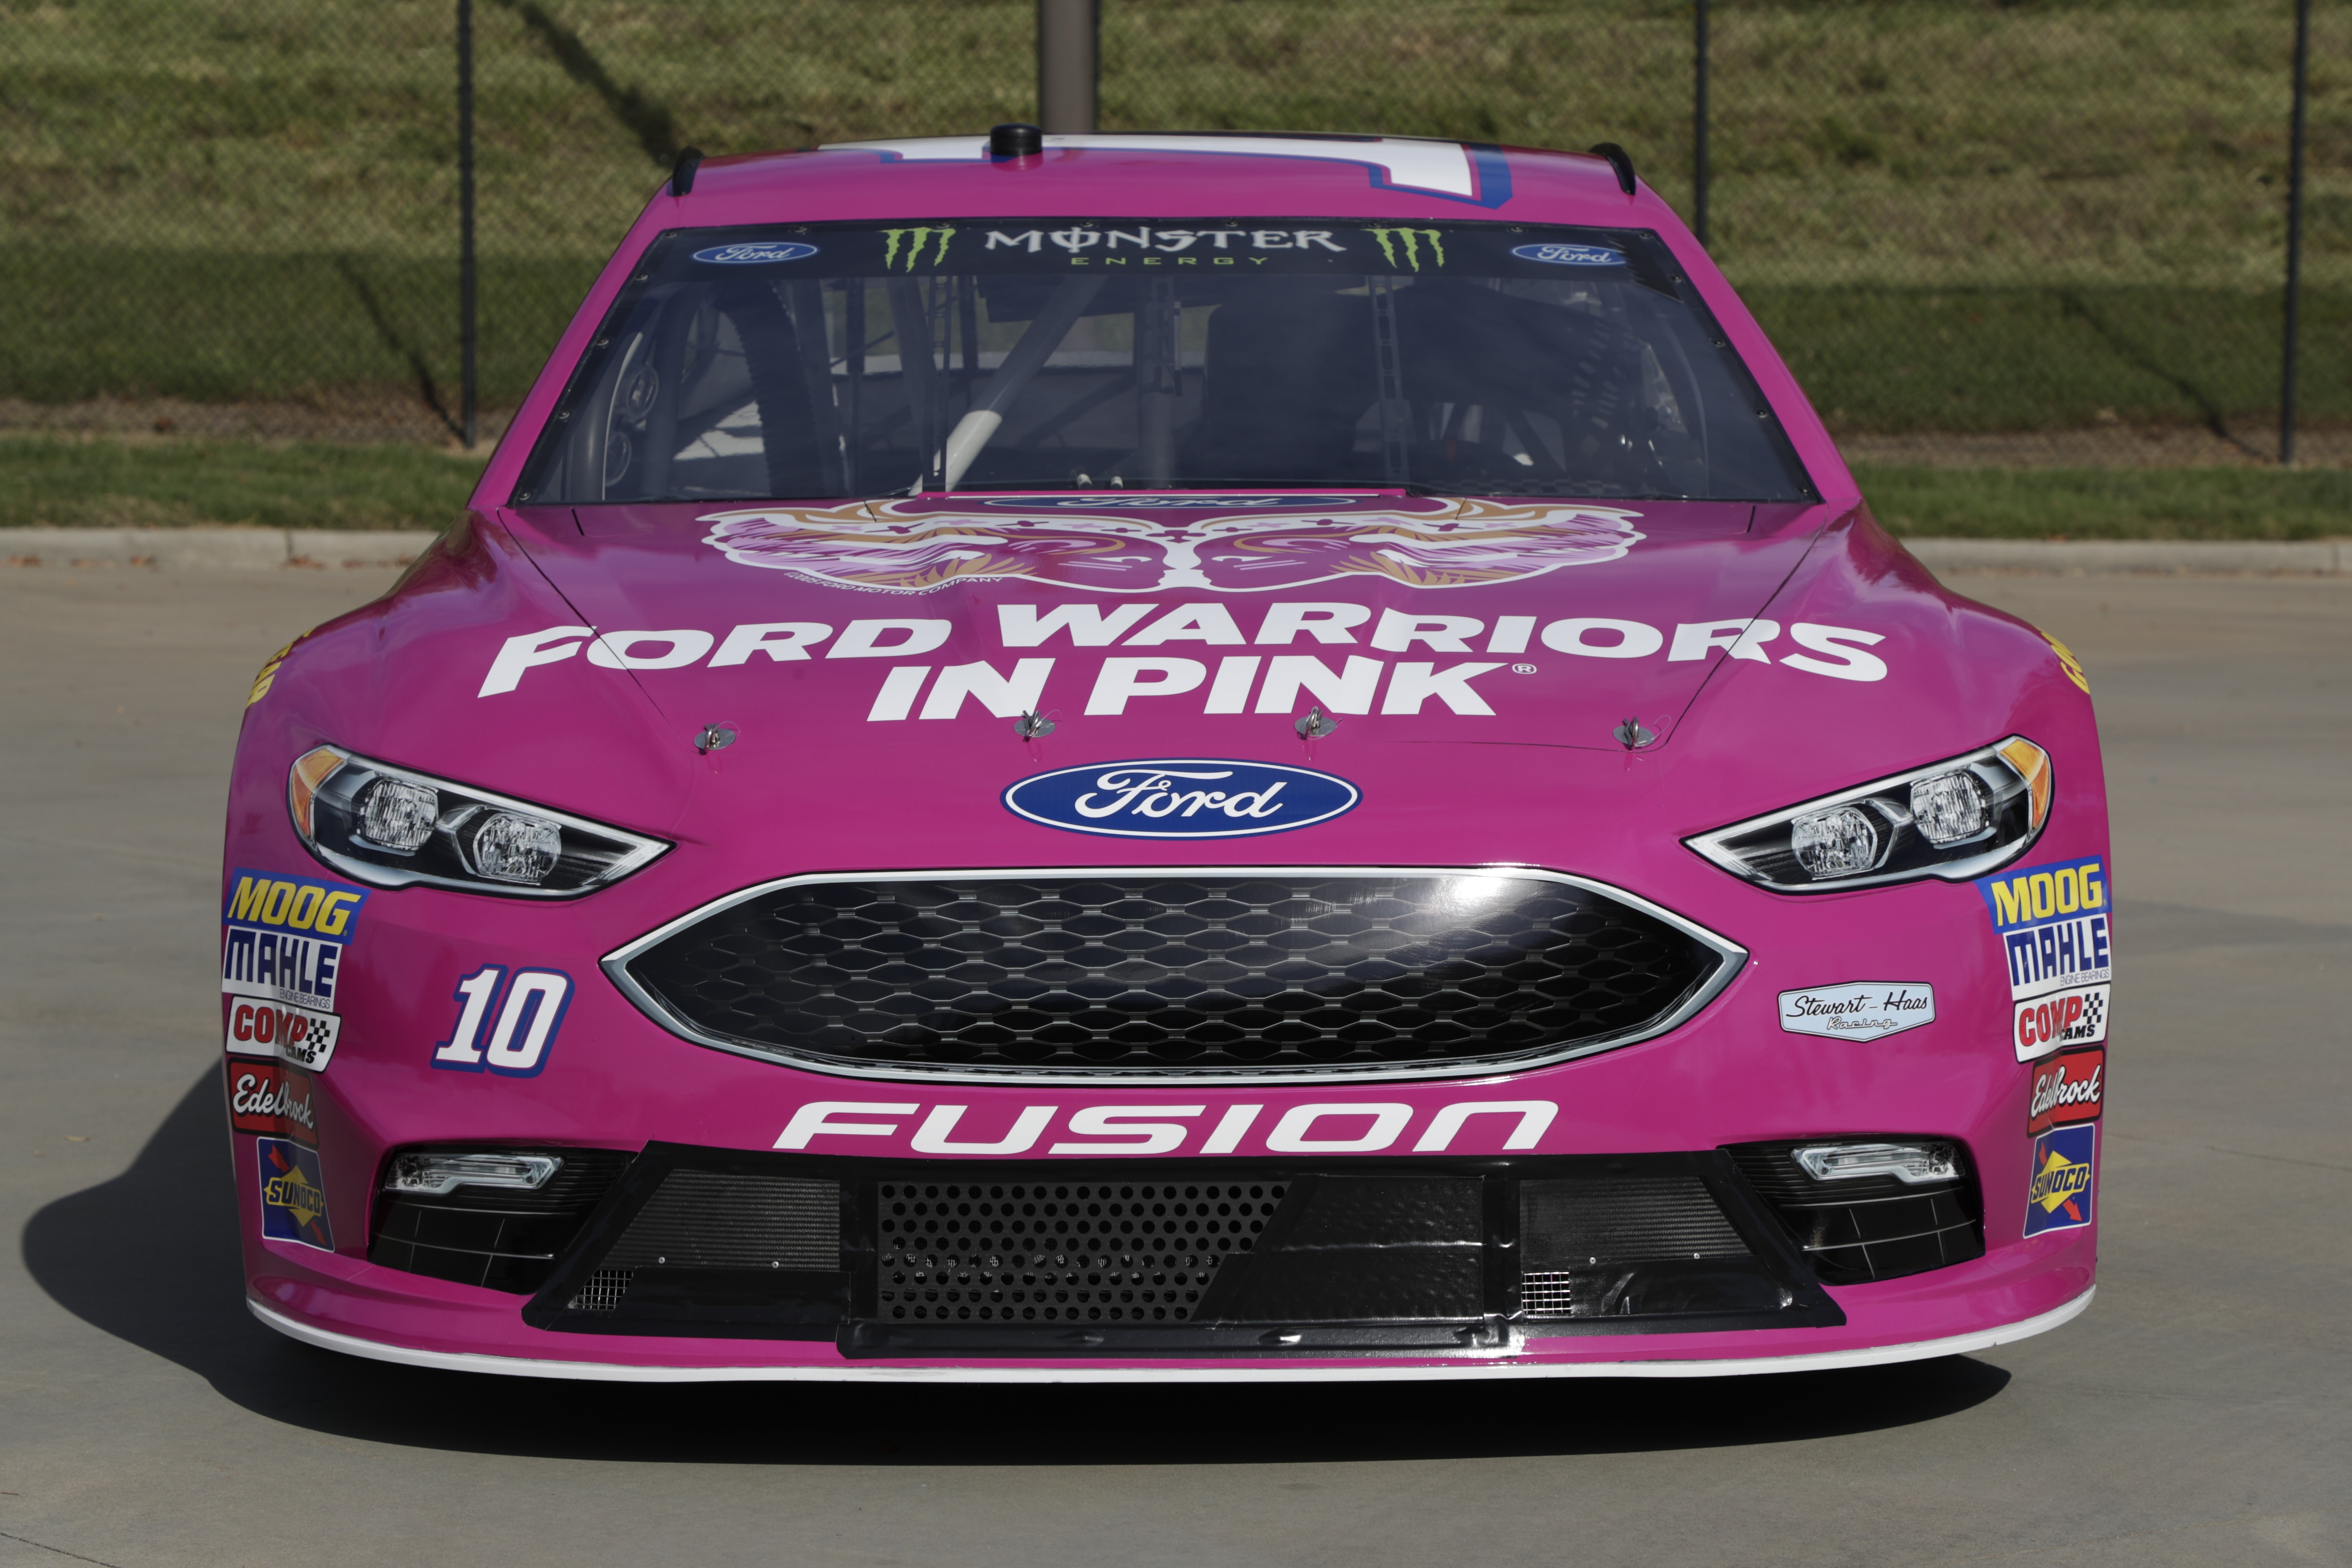 Danica Patrick Debuts No. 10 Ford Warriors in Pink Fusion, Driving More  Good Days for Breast Cancer Awareness